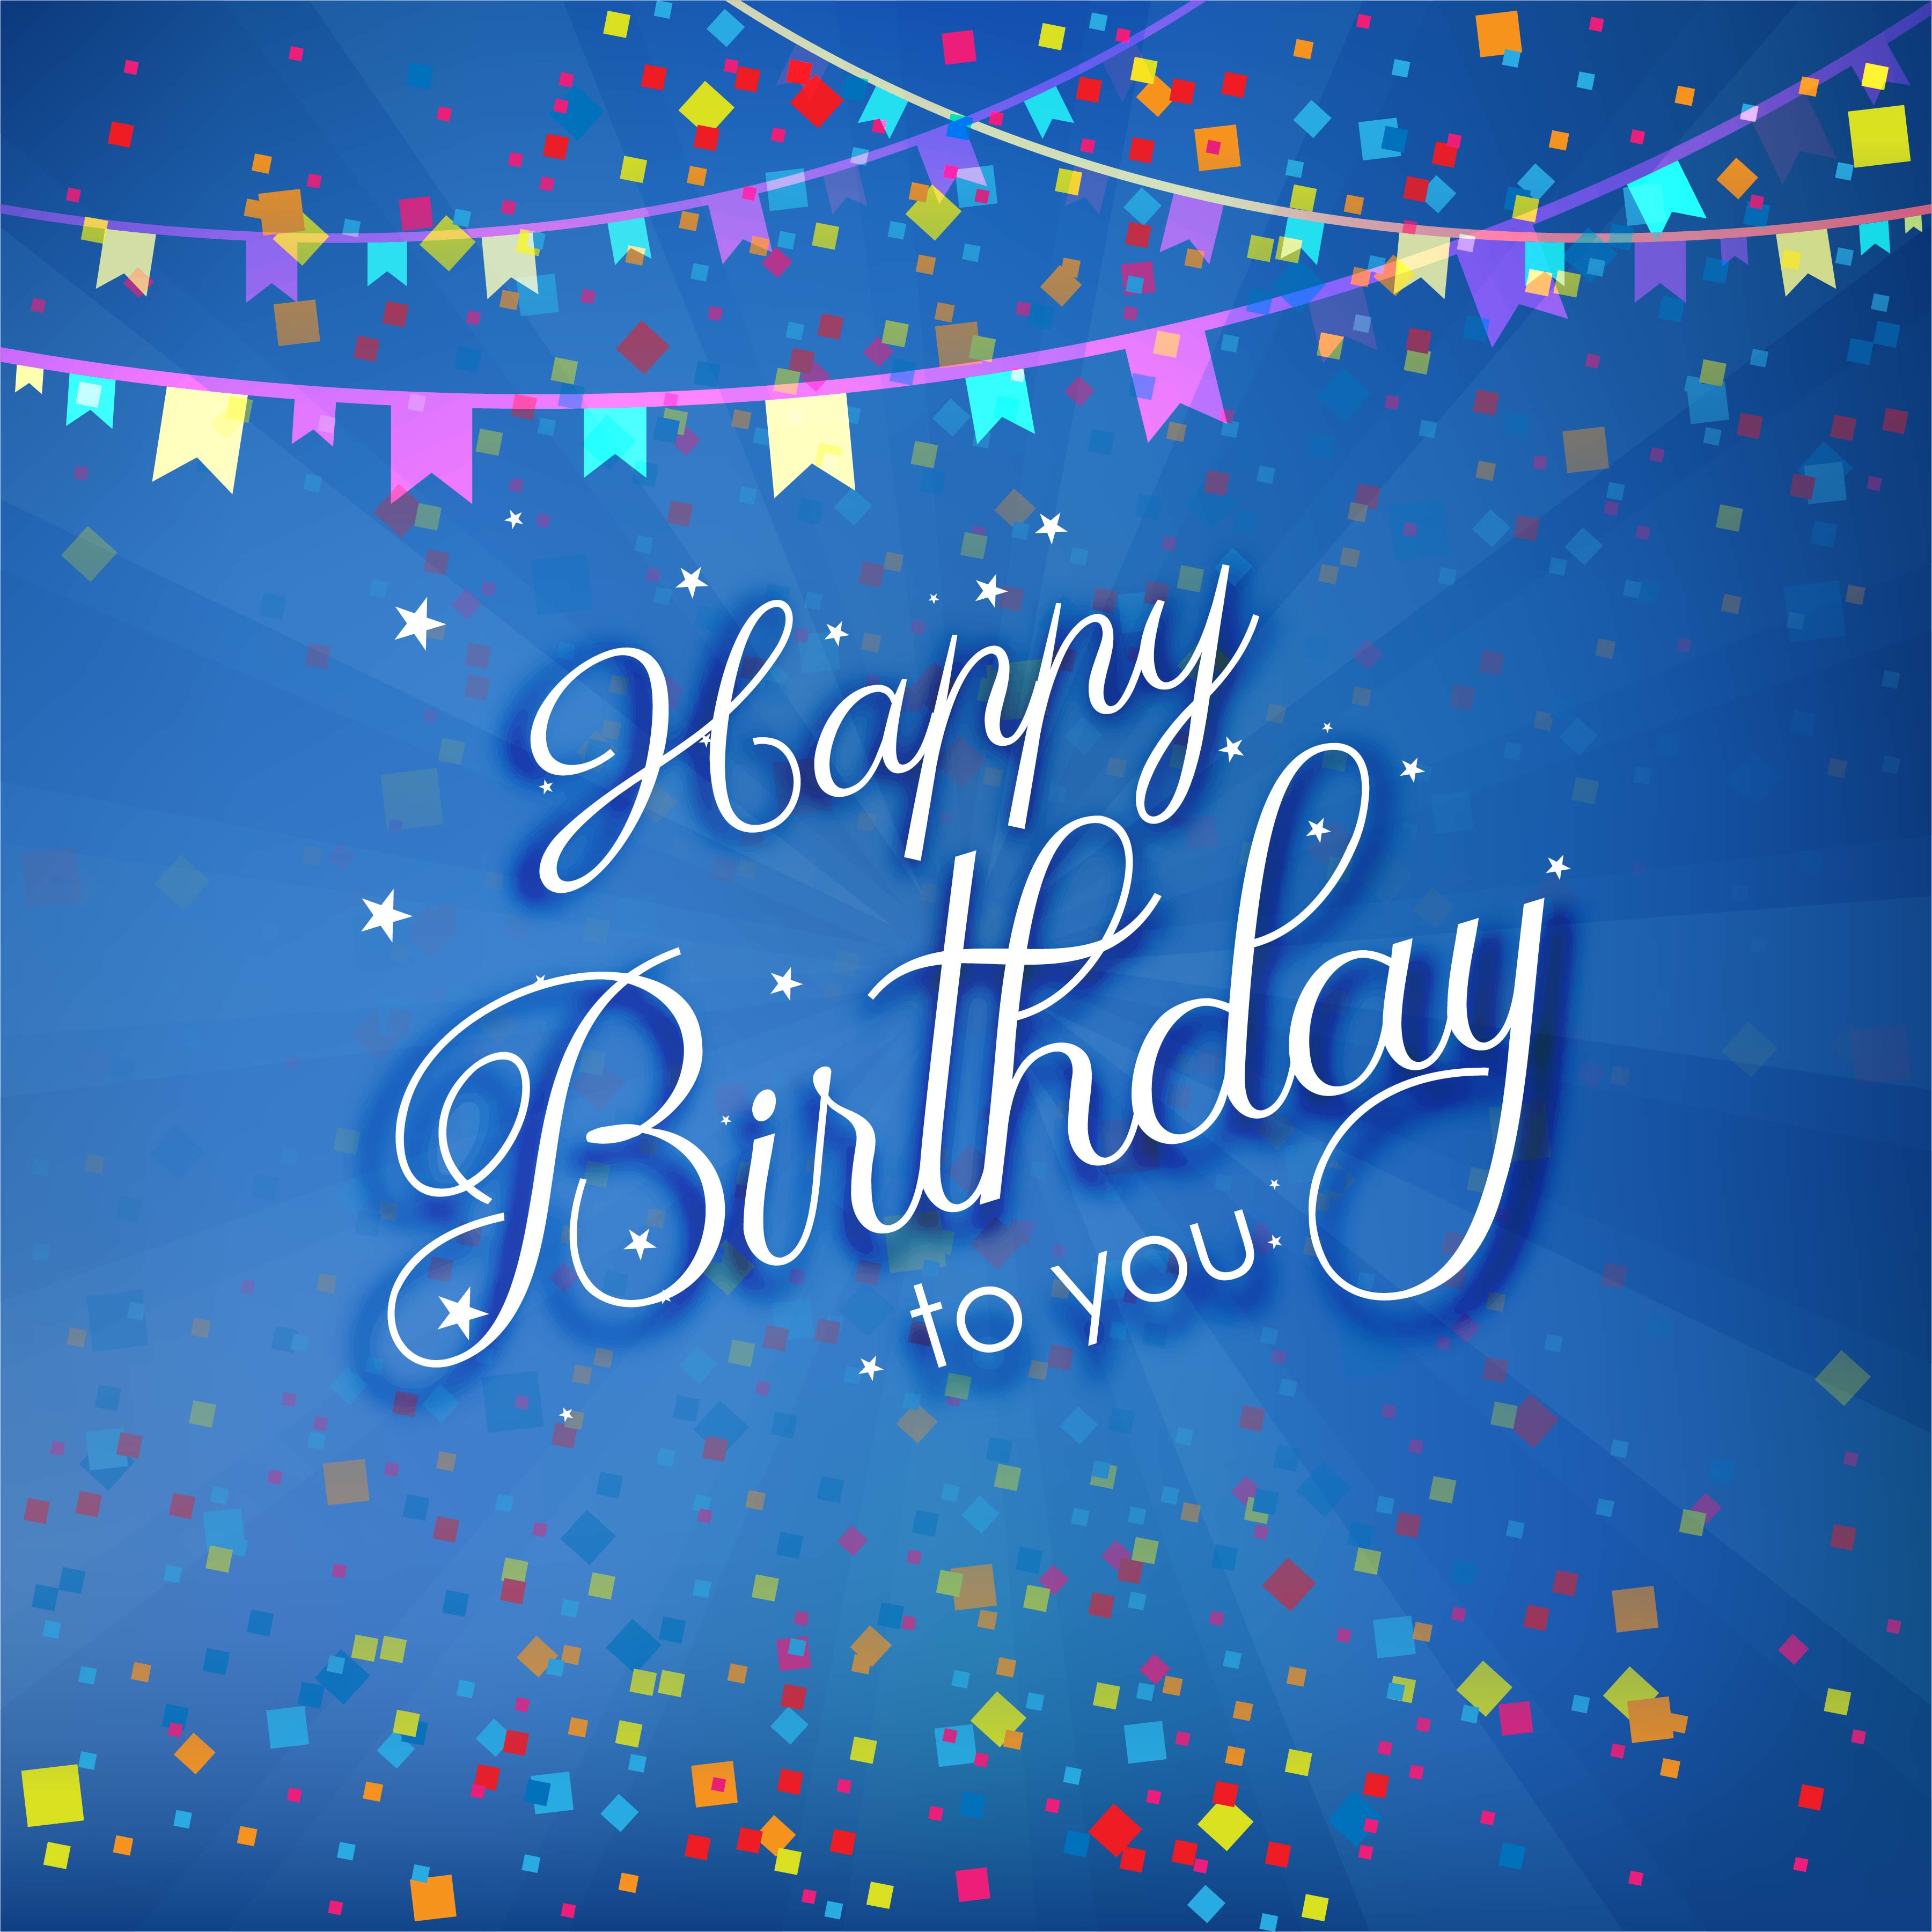 modern-decorative-colorful-birthday-poster-background-237547-vector-art